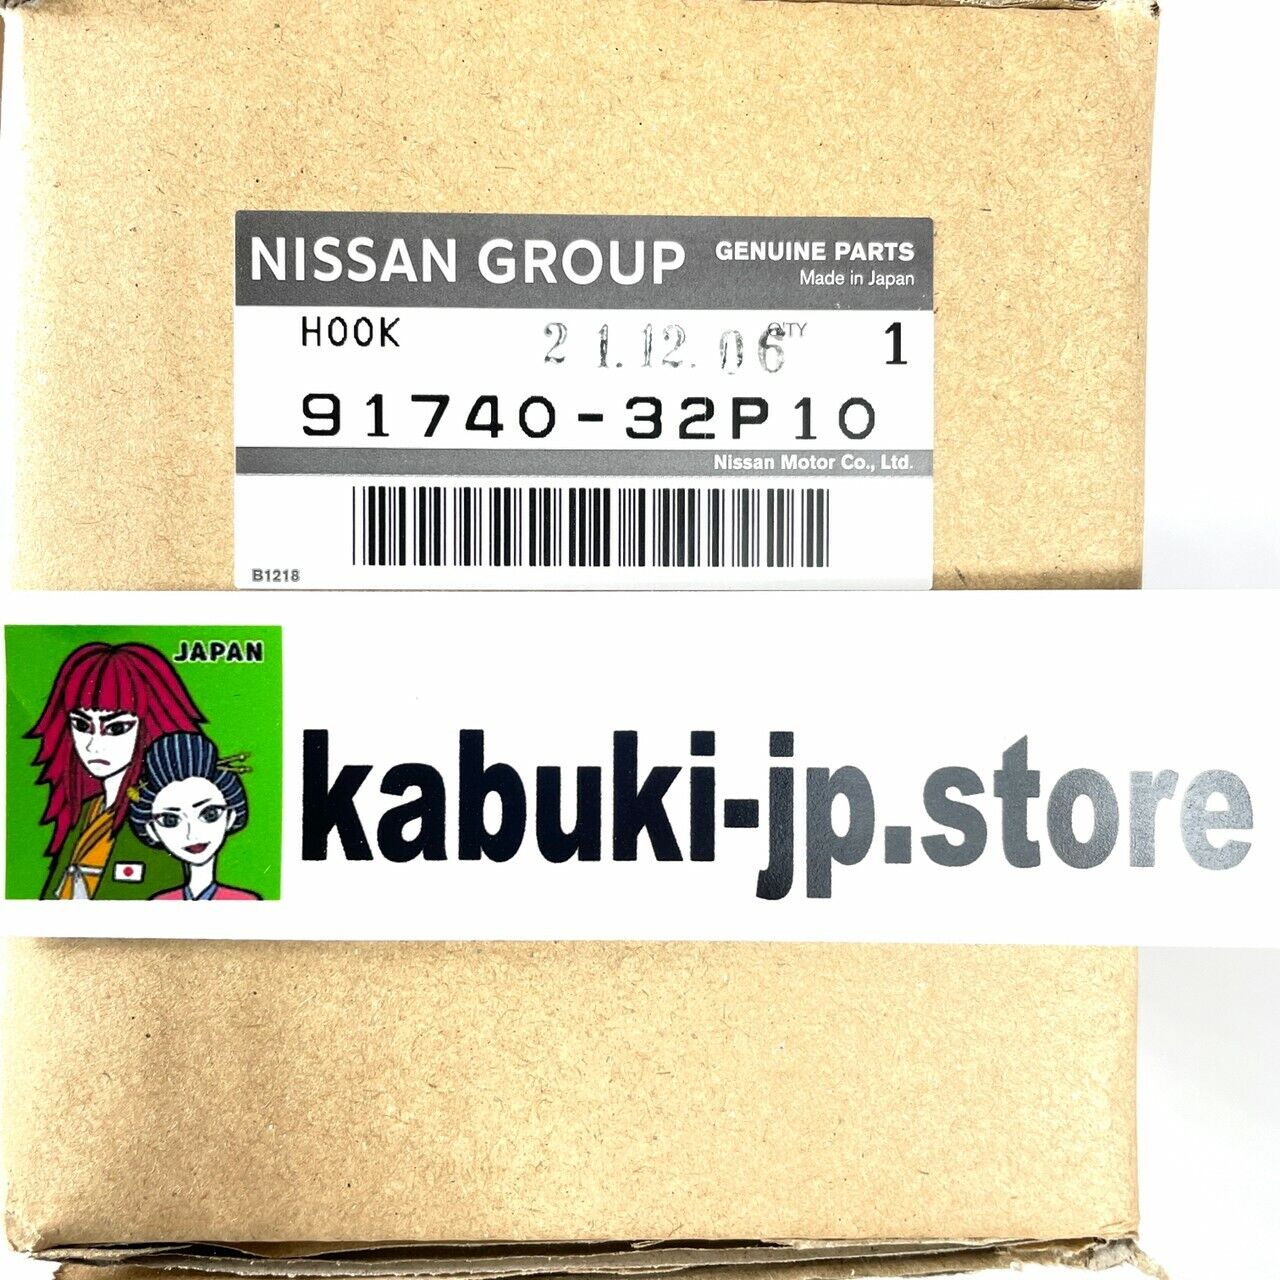 Nissan Genuine 91740-32P10 300zx Z32 2+2 T-top Bar Hook OEM New From Japan Car